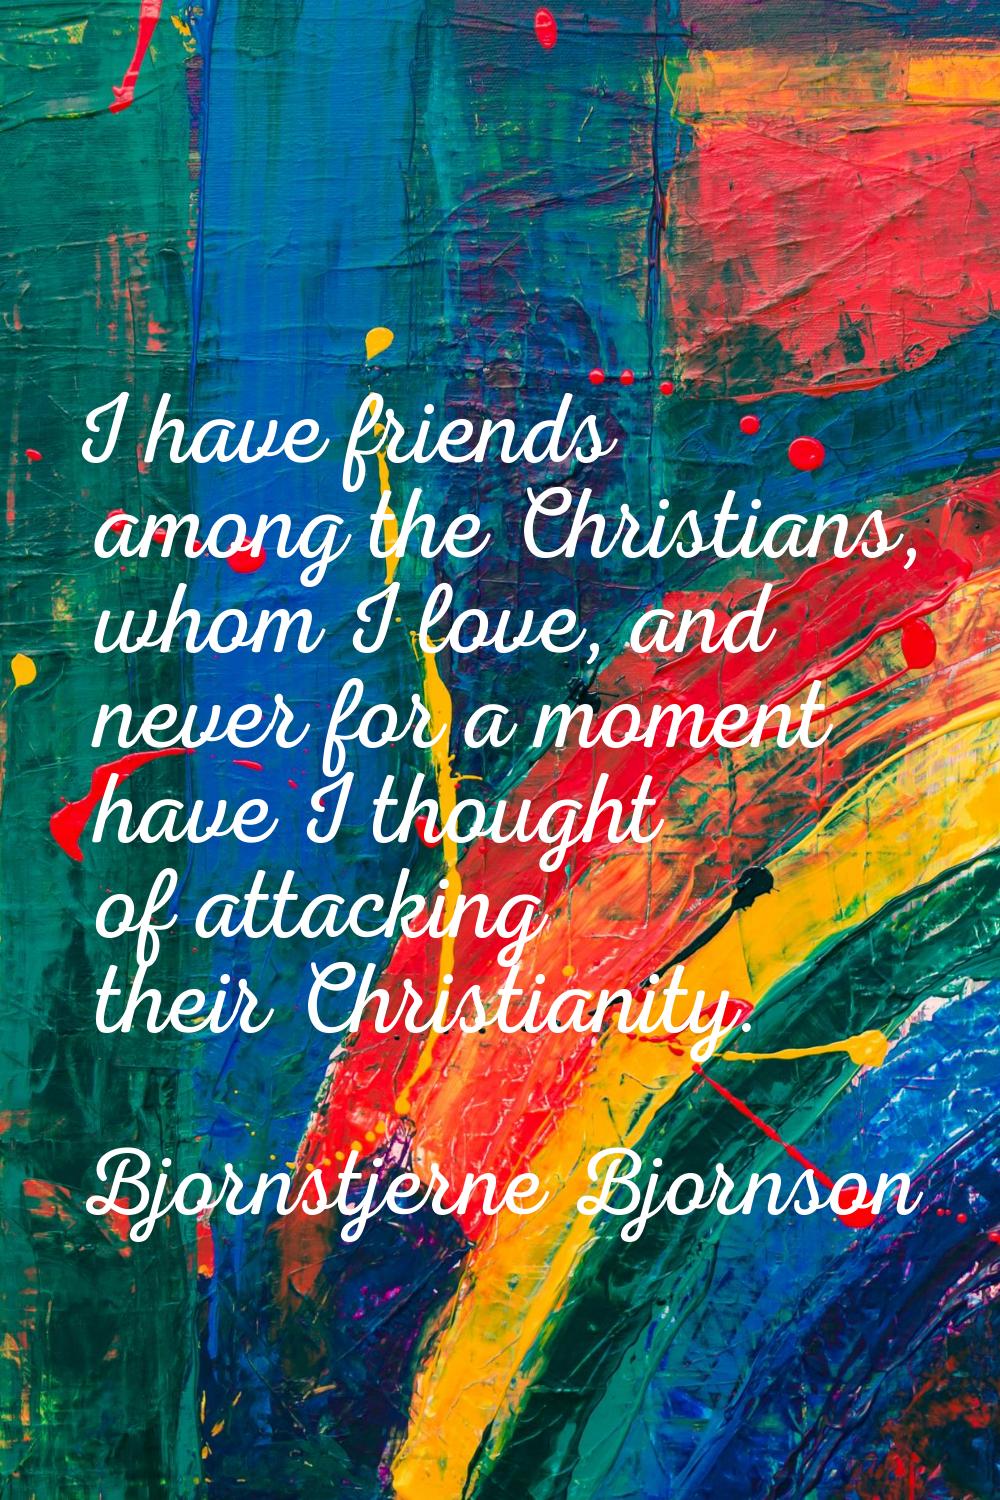 I have friends among the Christians, whom I love, and never for a moment have I thought of attackin